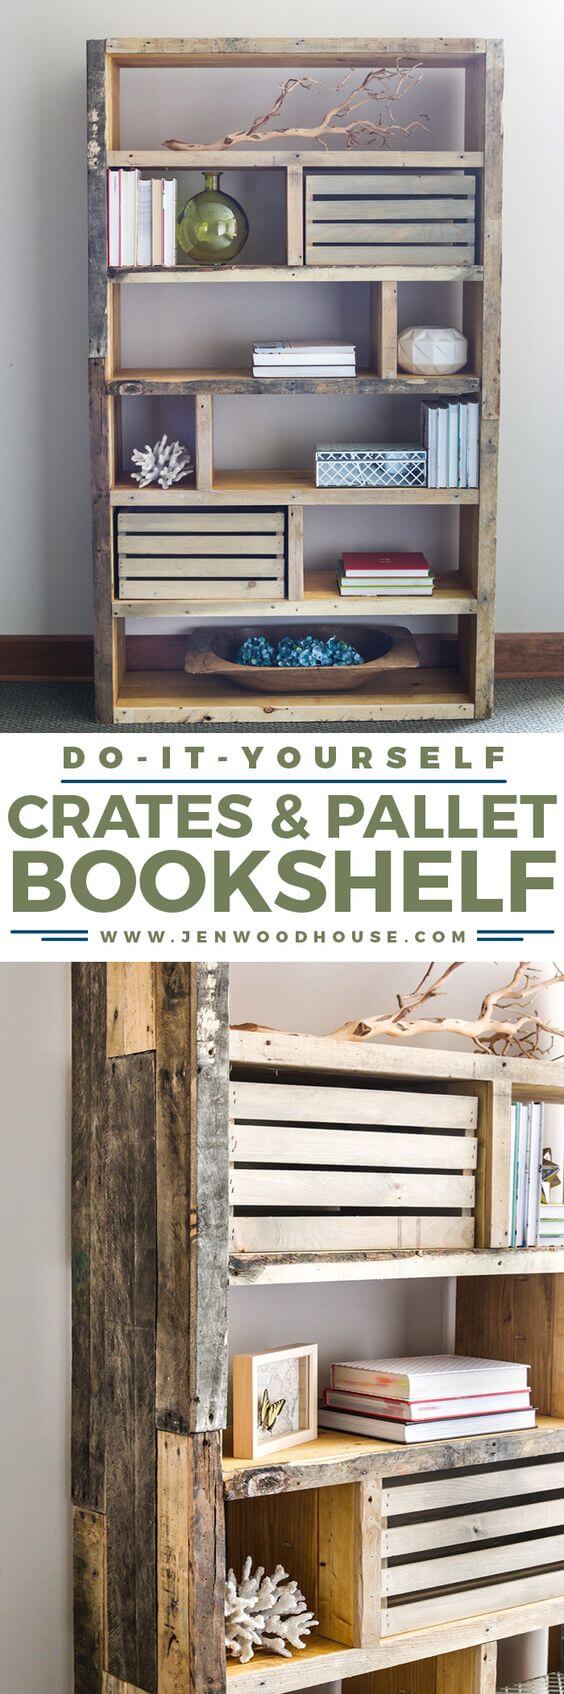 Rustic Bookshelf from Crates and Pallet